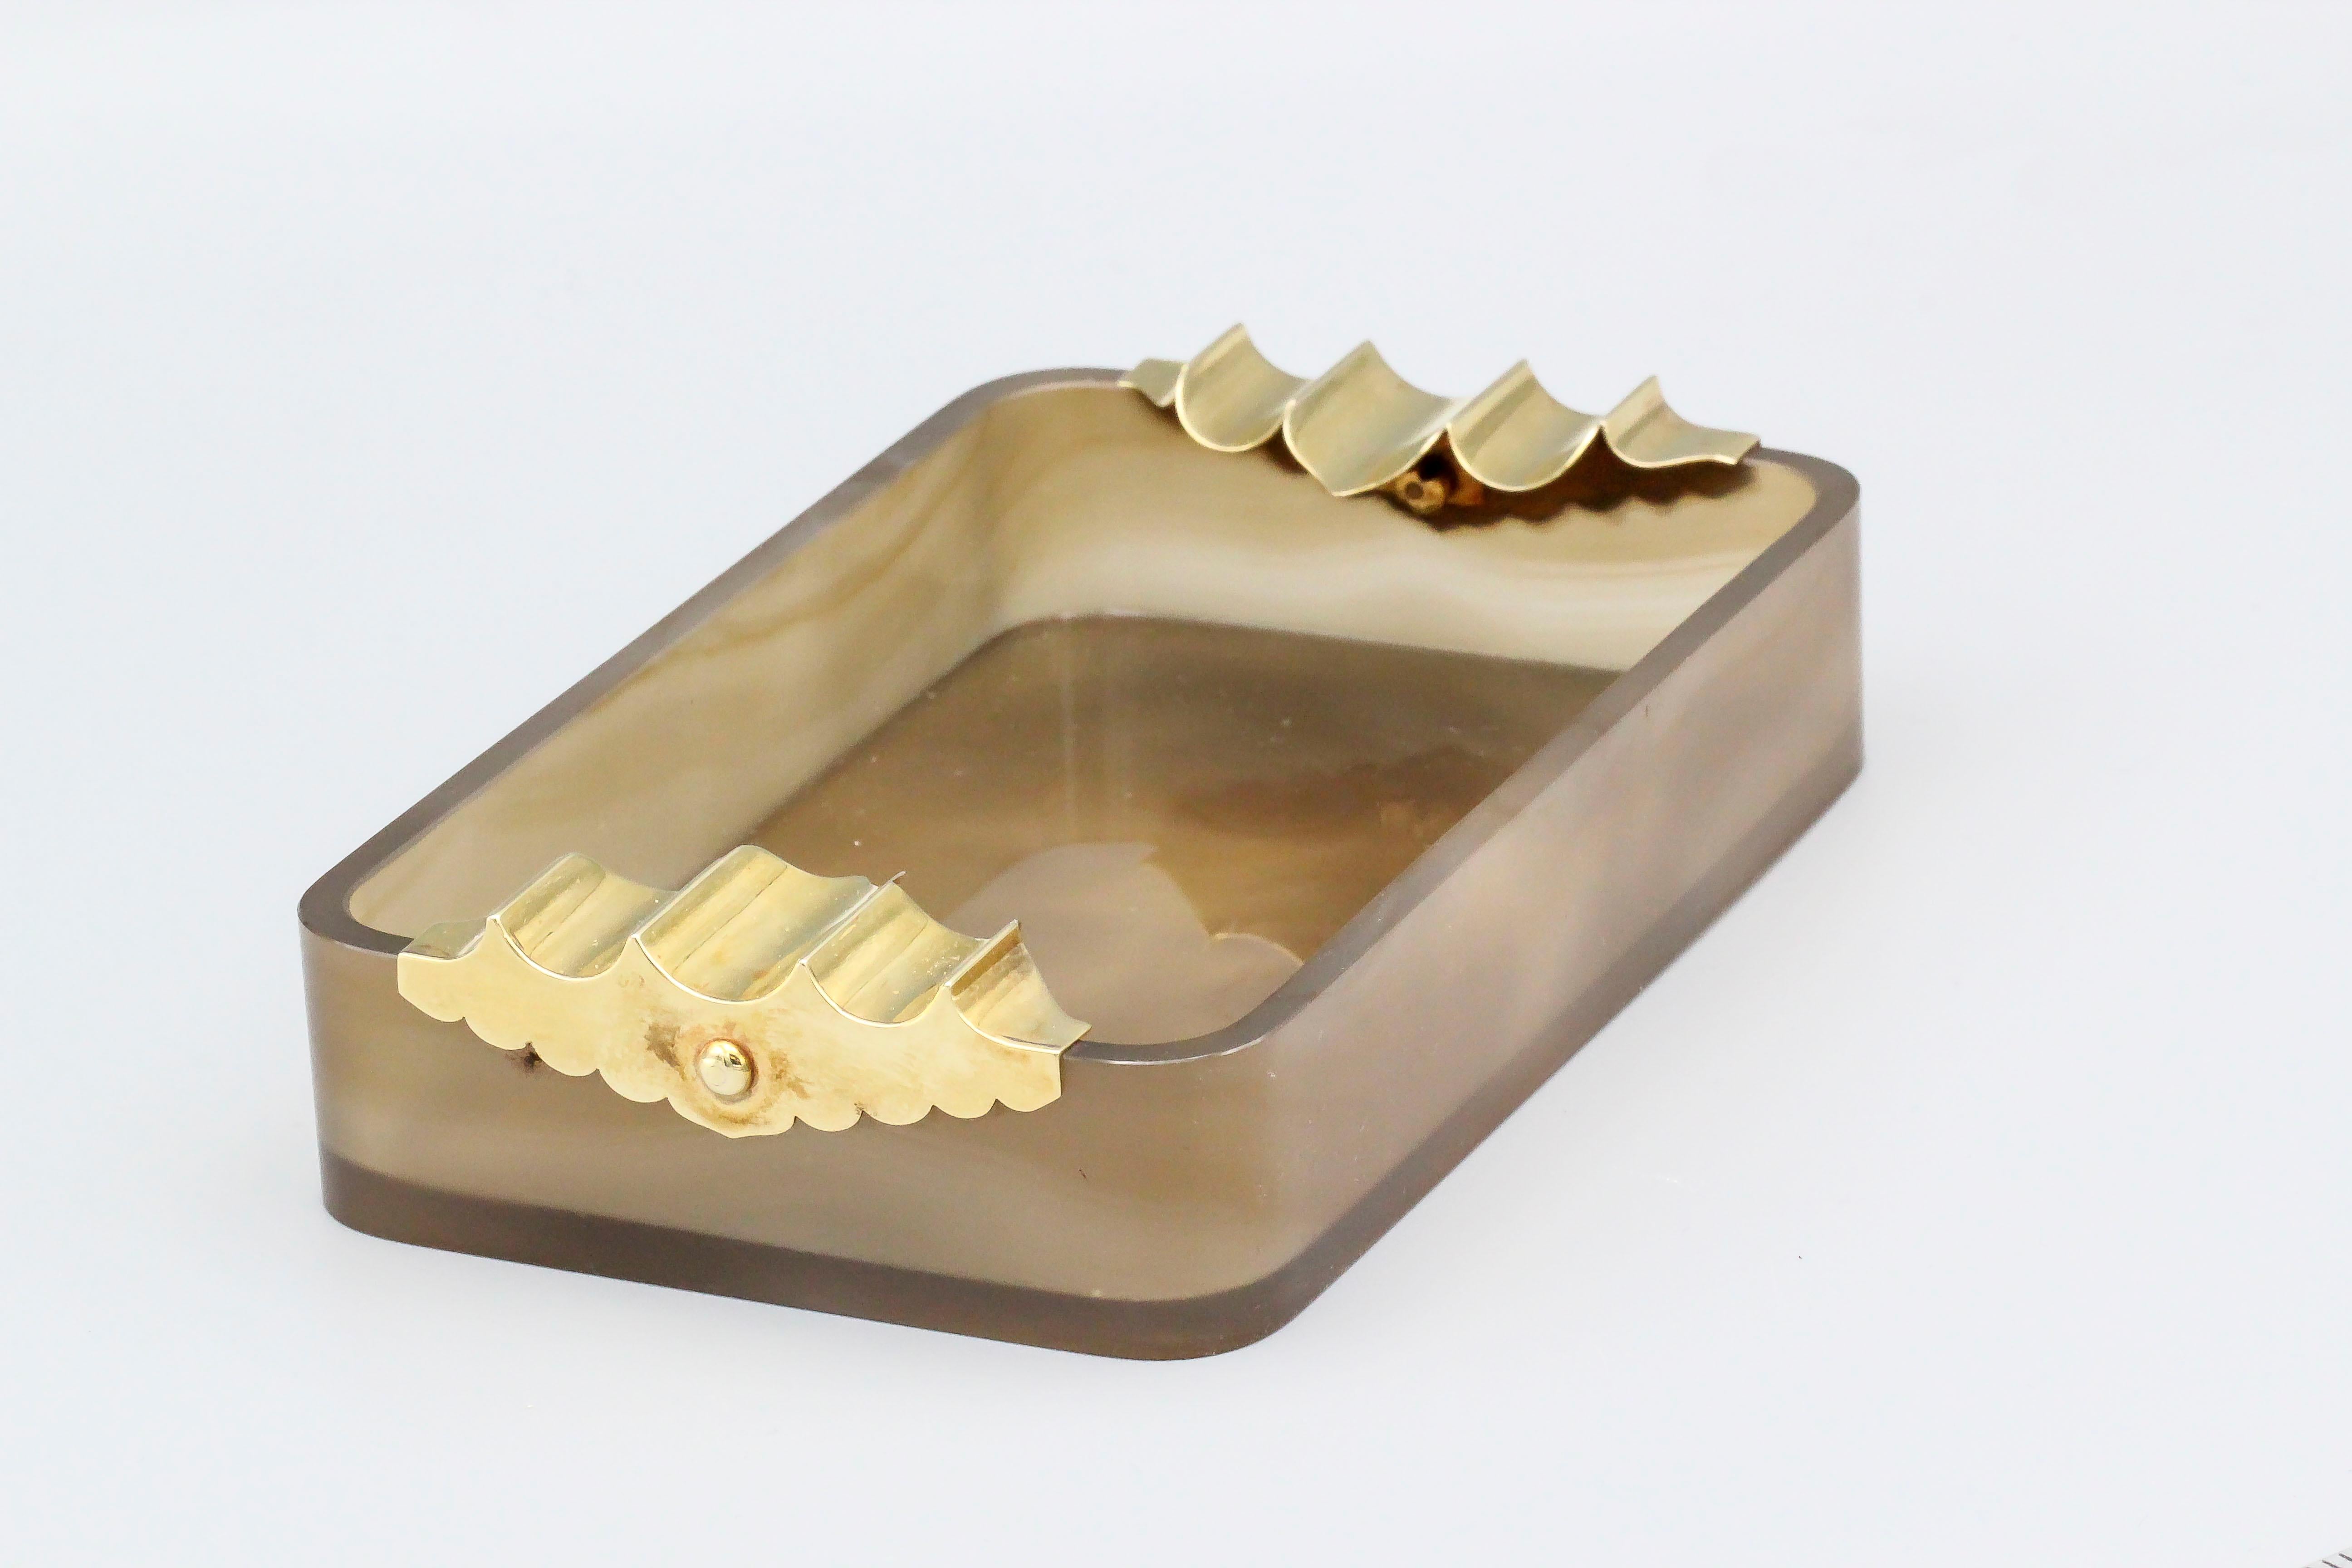 Rare and unusual agate and 14K yellow gold ashtray by Cartier, circa 1940s. It features three gold ribs on each end over a multicolored agate body.

Hallmarks: Cartier, 14K, 